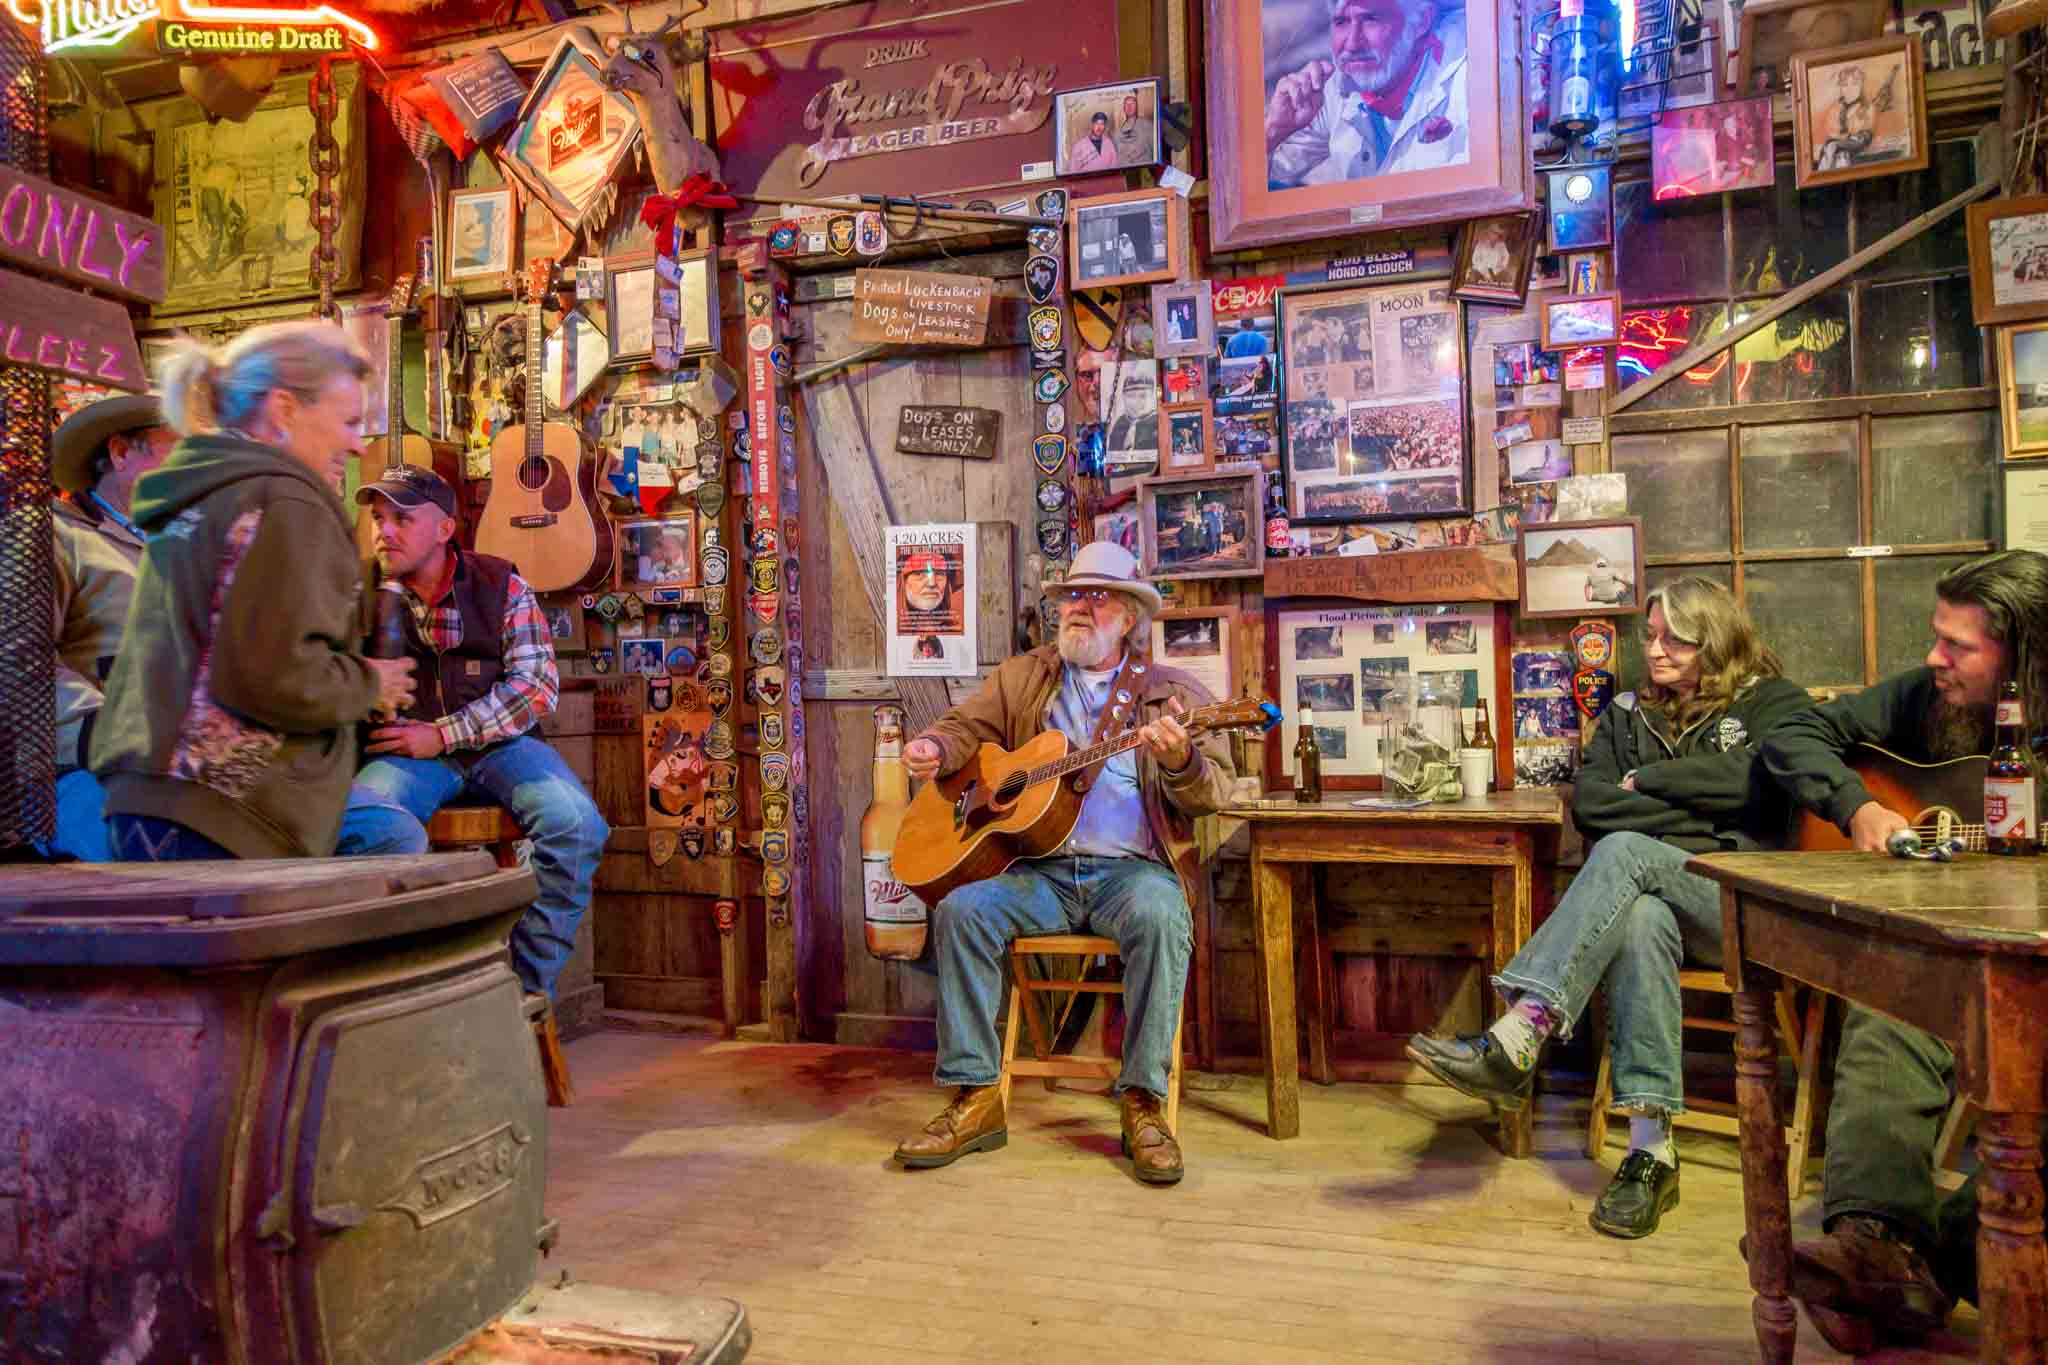 Guitar player and listeners in a cozy bar